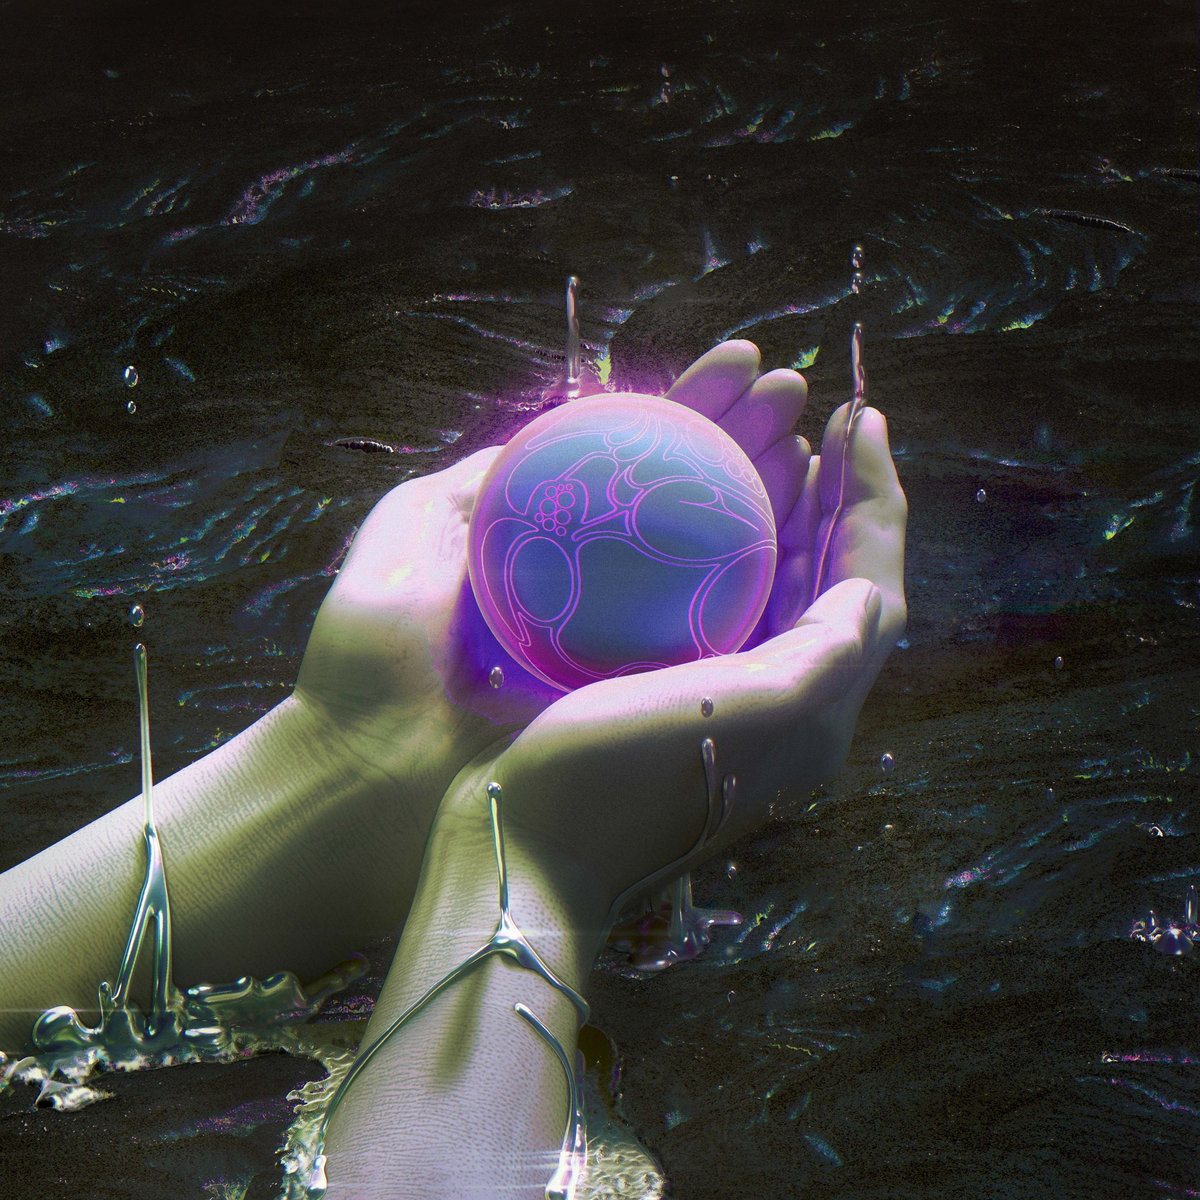 Album art for Mercurial World (Deluxe) by Magdalena Bay. A pair of hands holding a pink and blue orb.